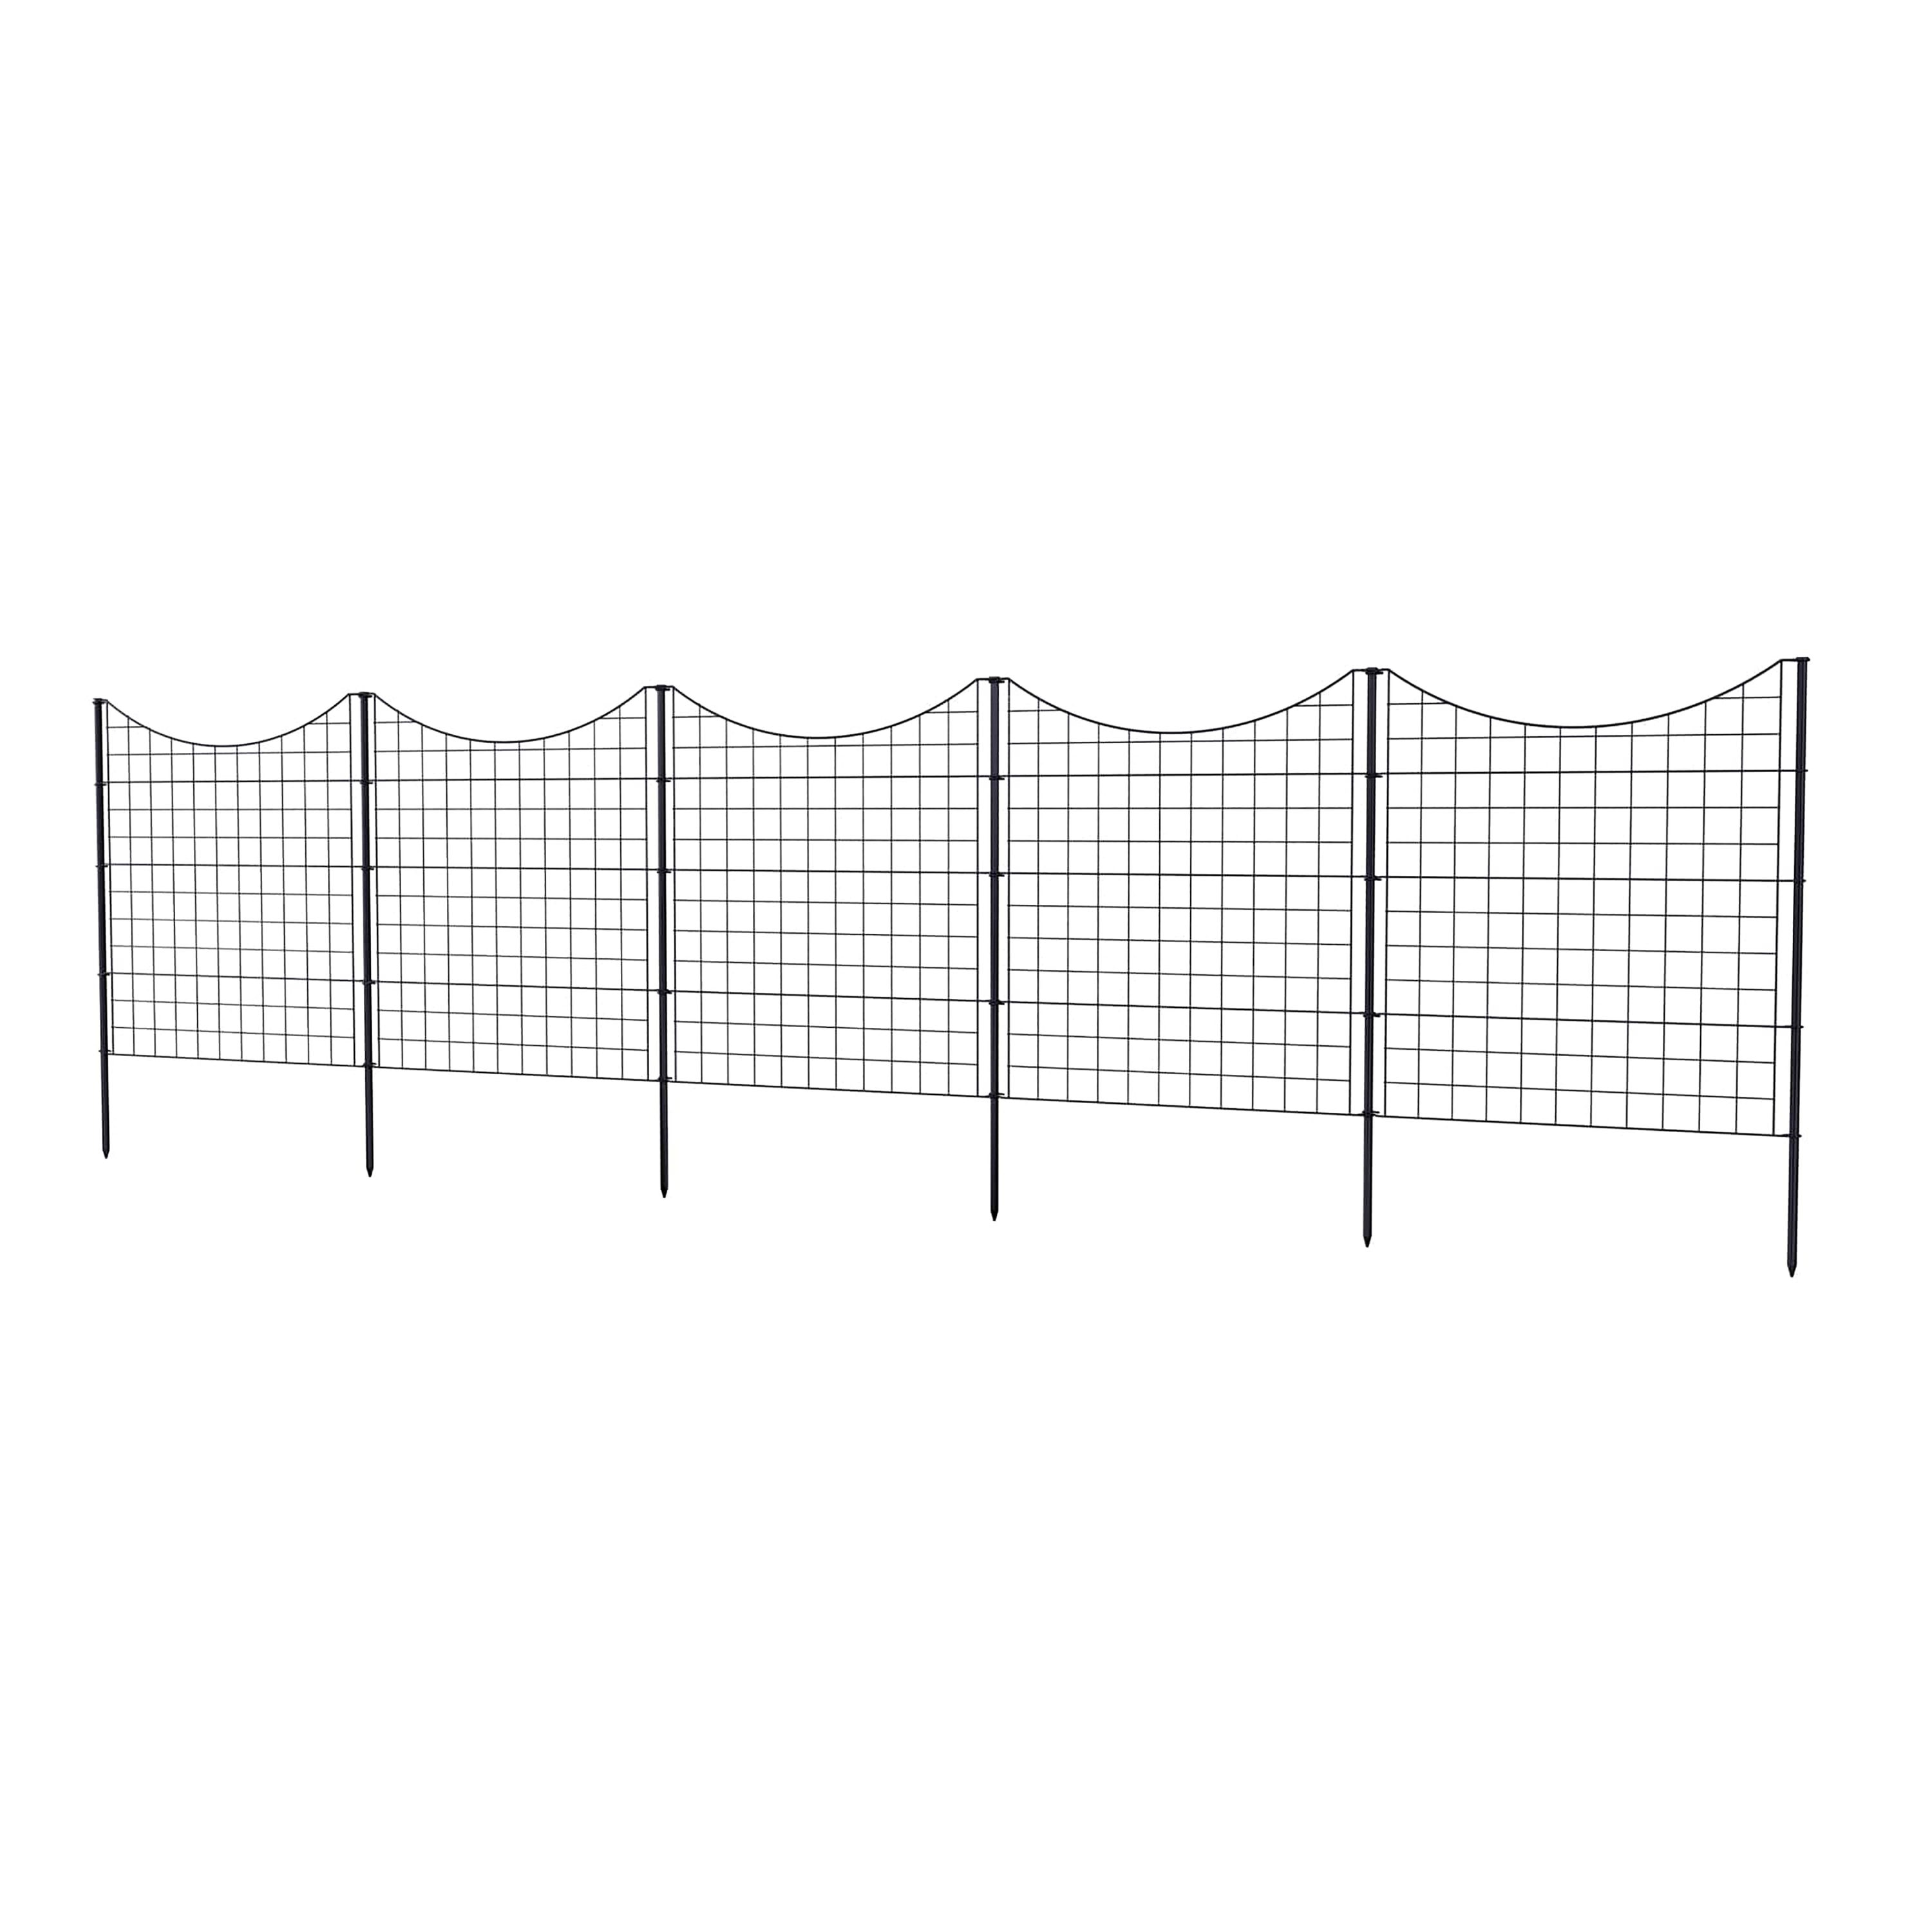 Zippity Outdoor Products 39in Tall Garden Metal Dog Fence Panels (5 Panels)  & Reviews